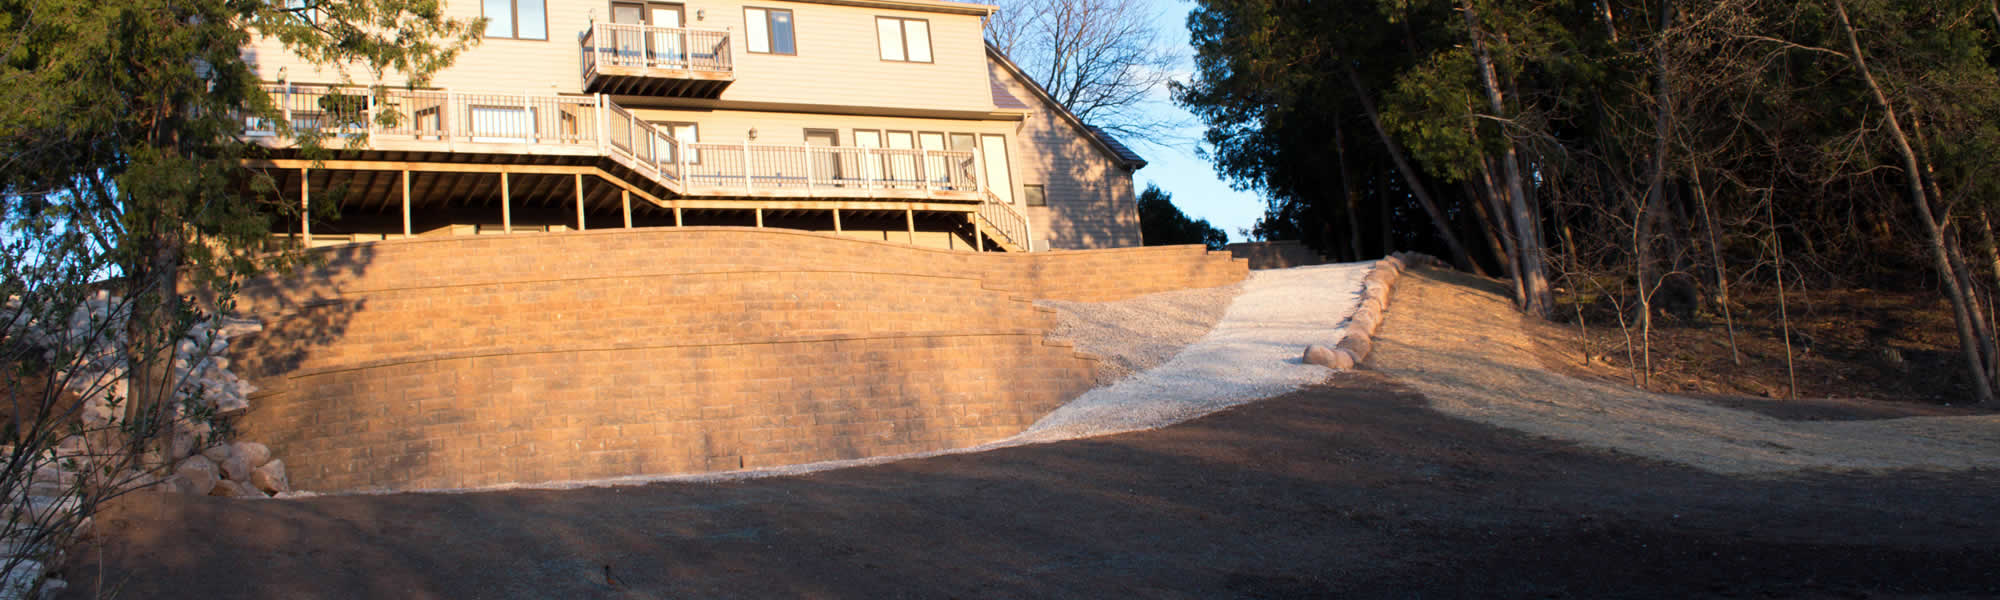 Hobart Retaining Wall Installation Services near me